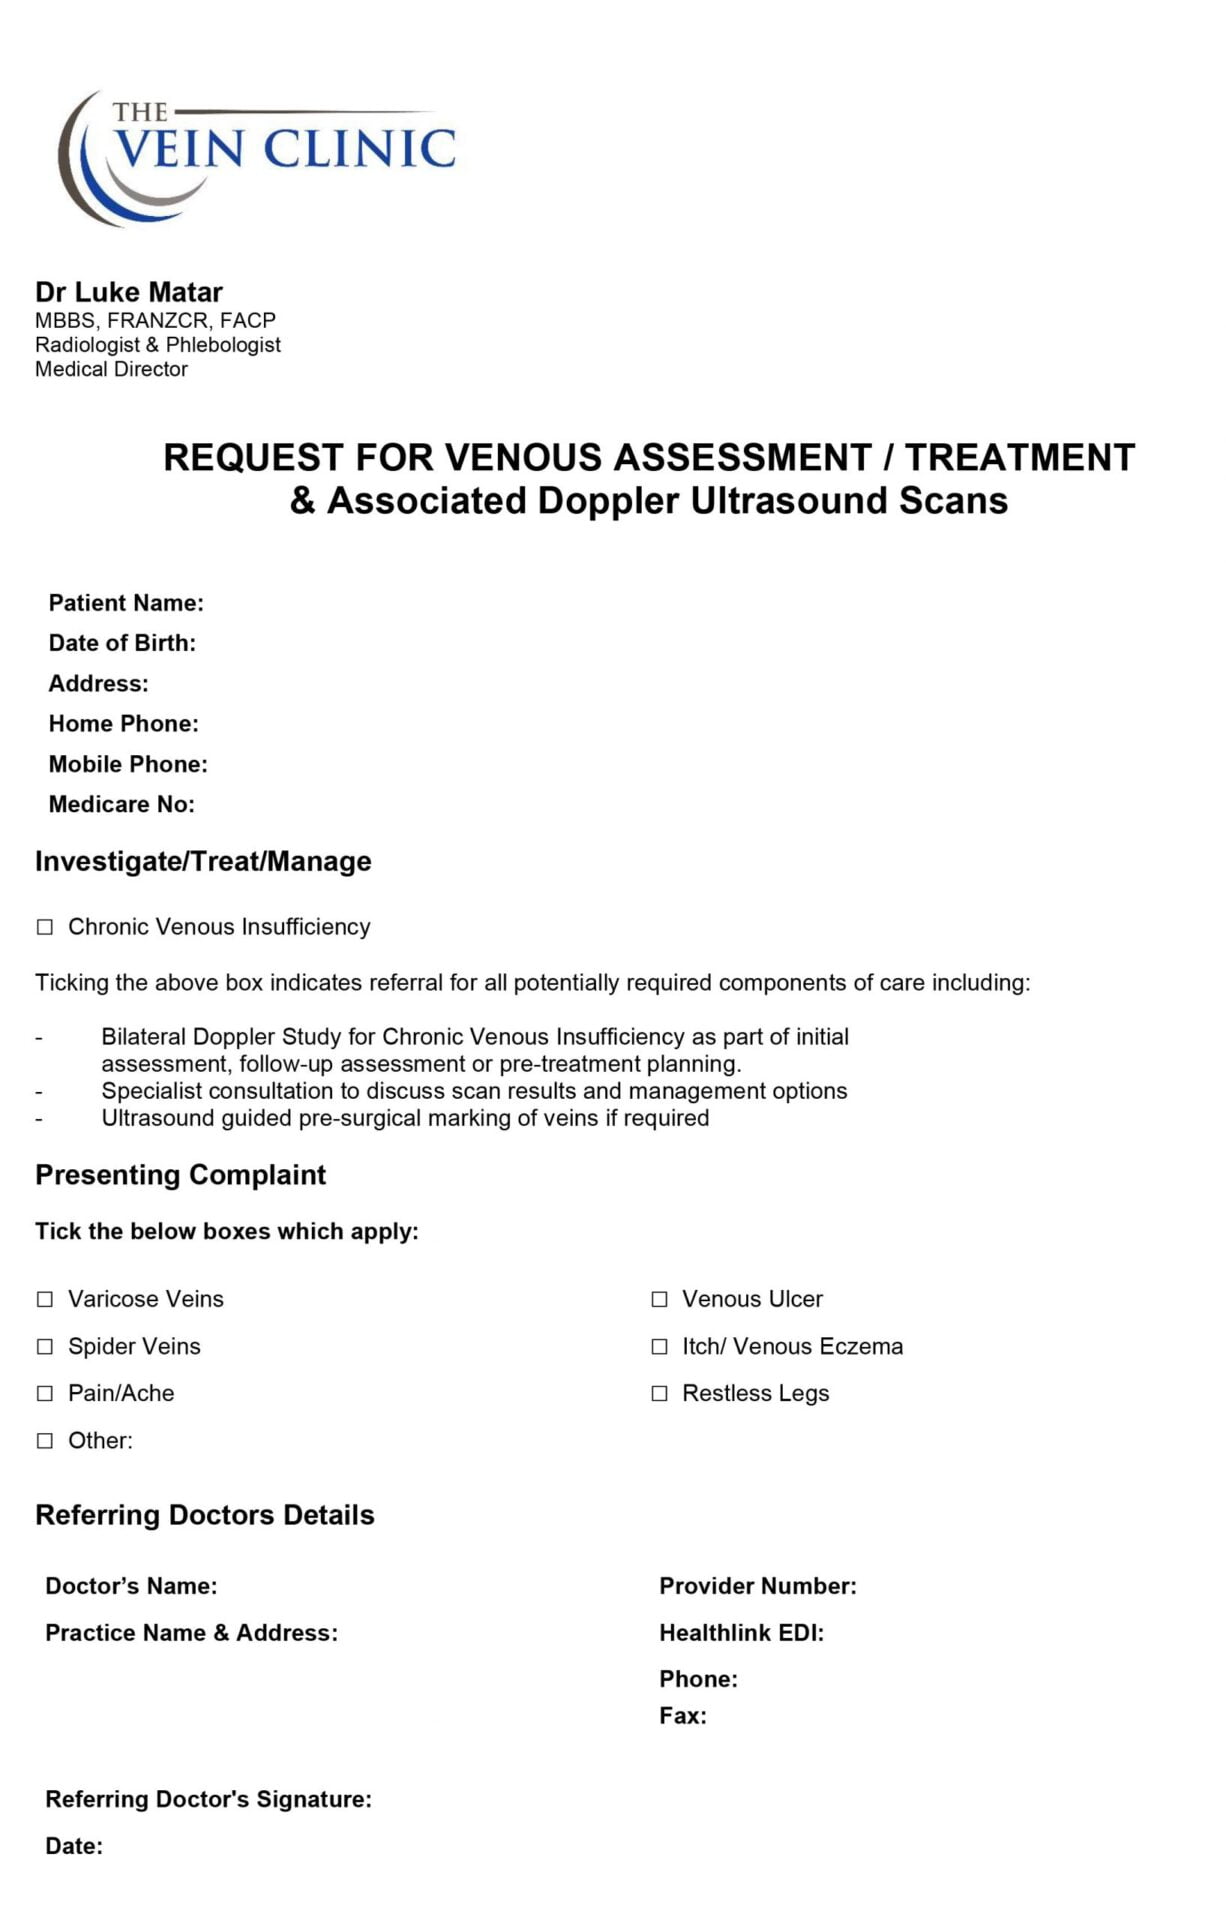 ultrasound-imaging-request-form-vein-clinic-perth